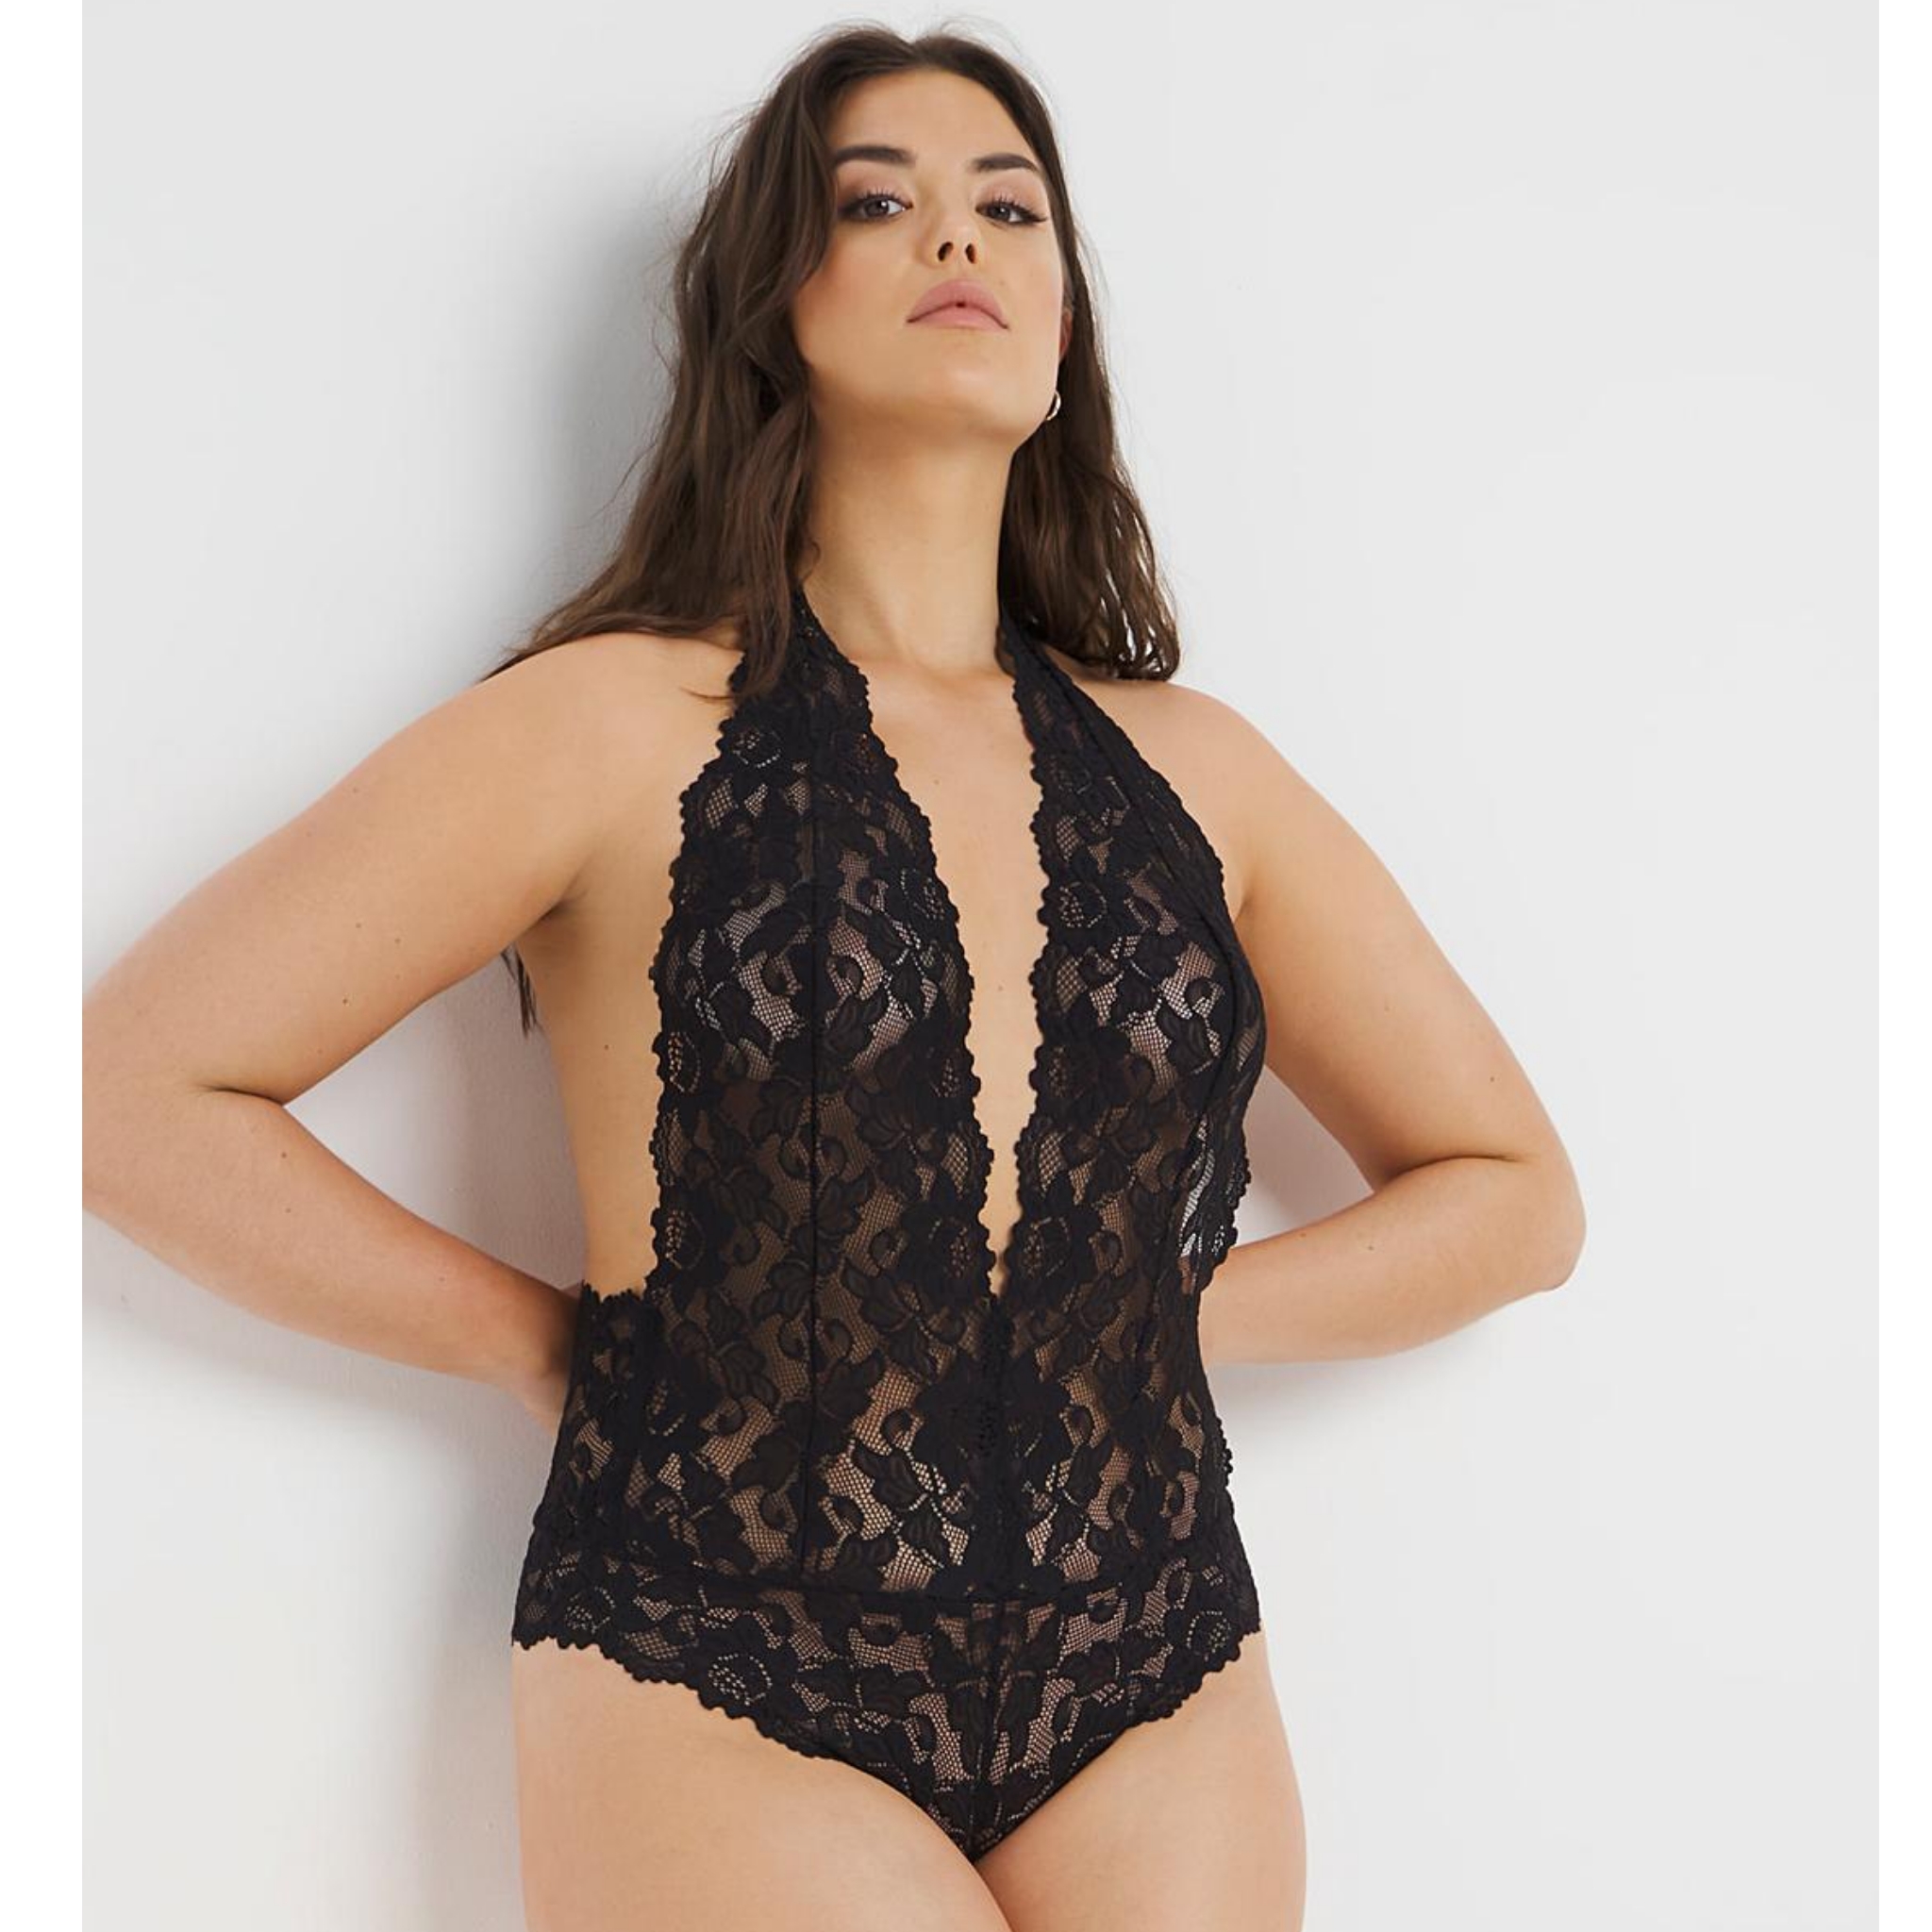 Millie Full Body Lace Lingerie - Ruzzy Essentials